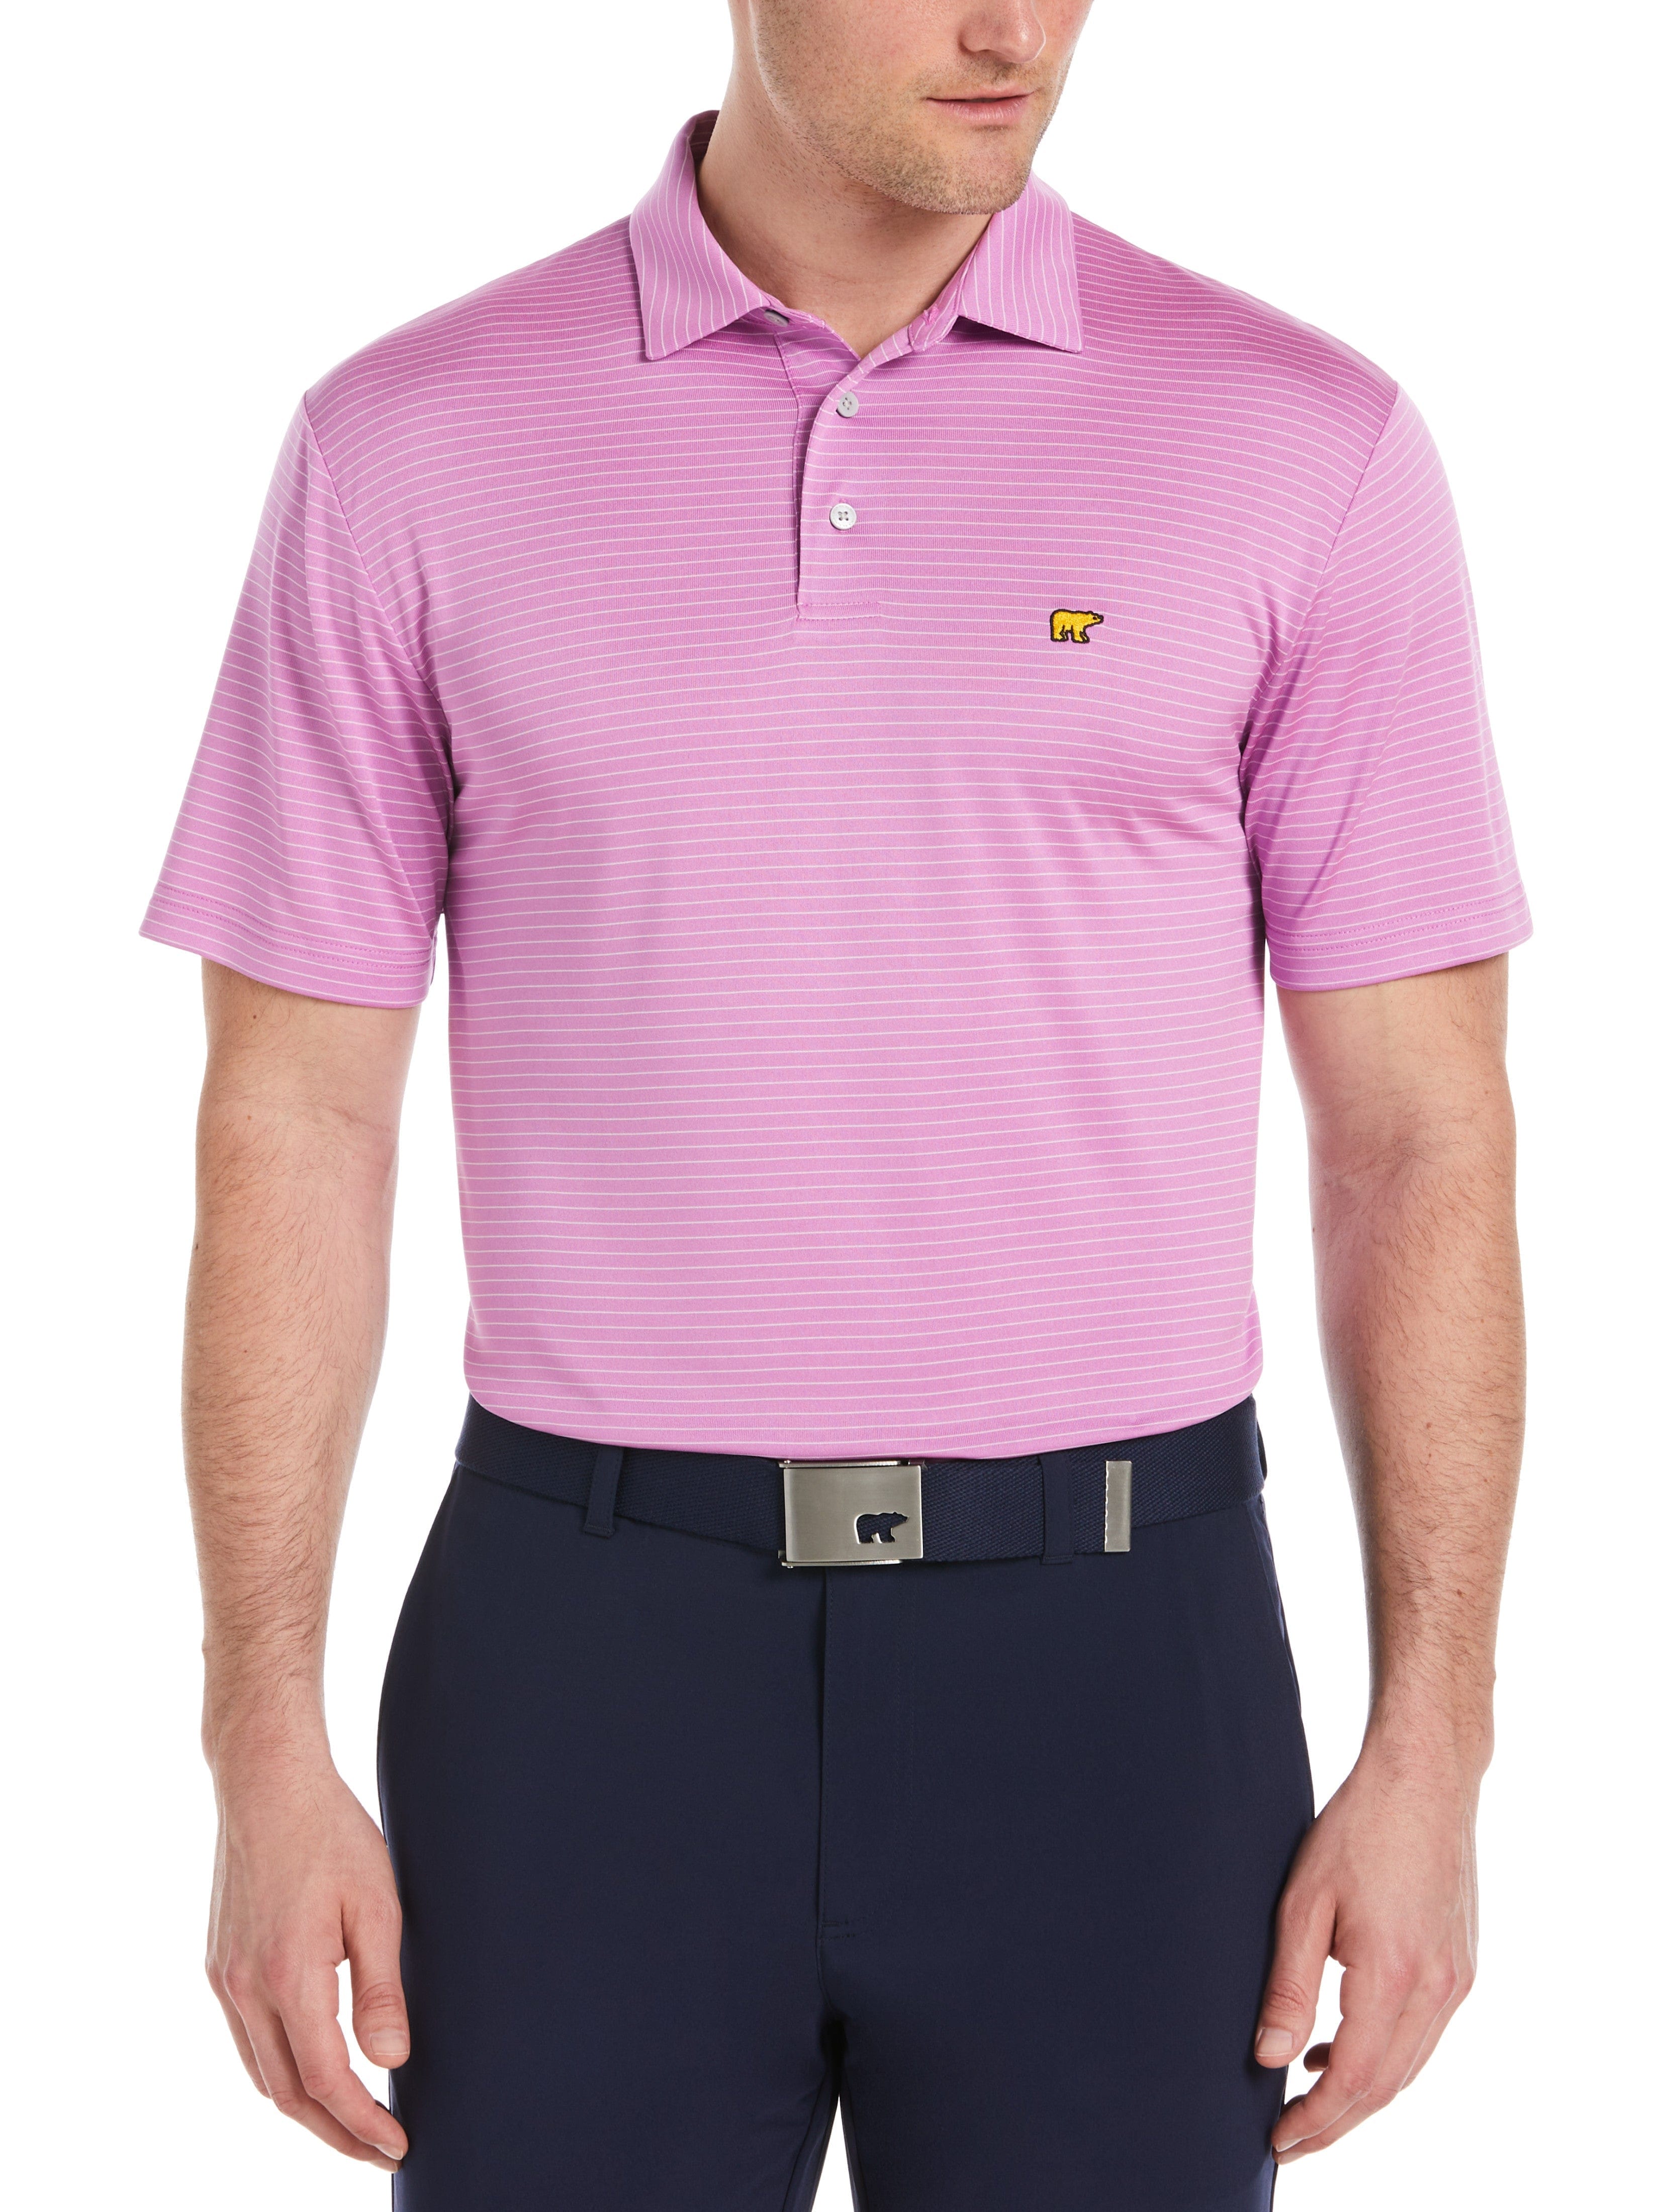 Jack Nicklaus Mens Two Color Stripe Golf Polo Shirt, Size Small, First Bloom Purple, 100% Polyester | Golf Apparel Shop